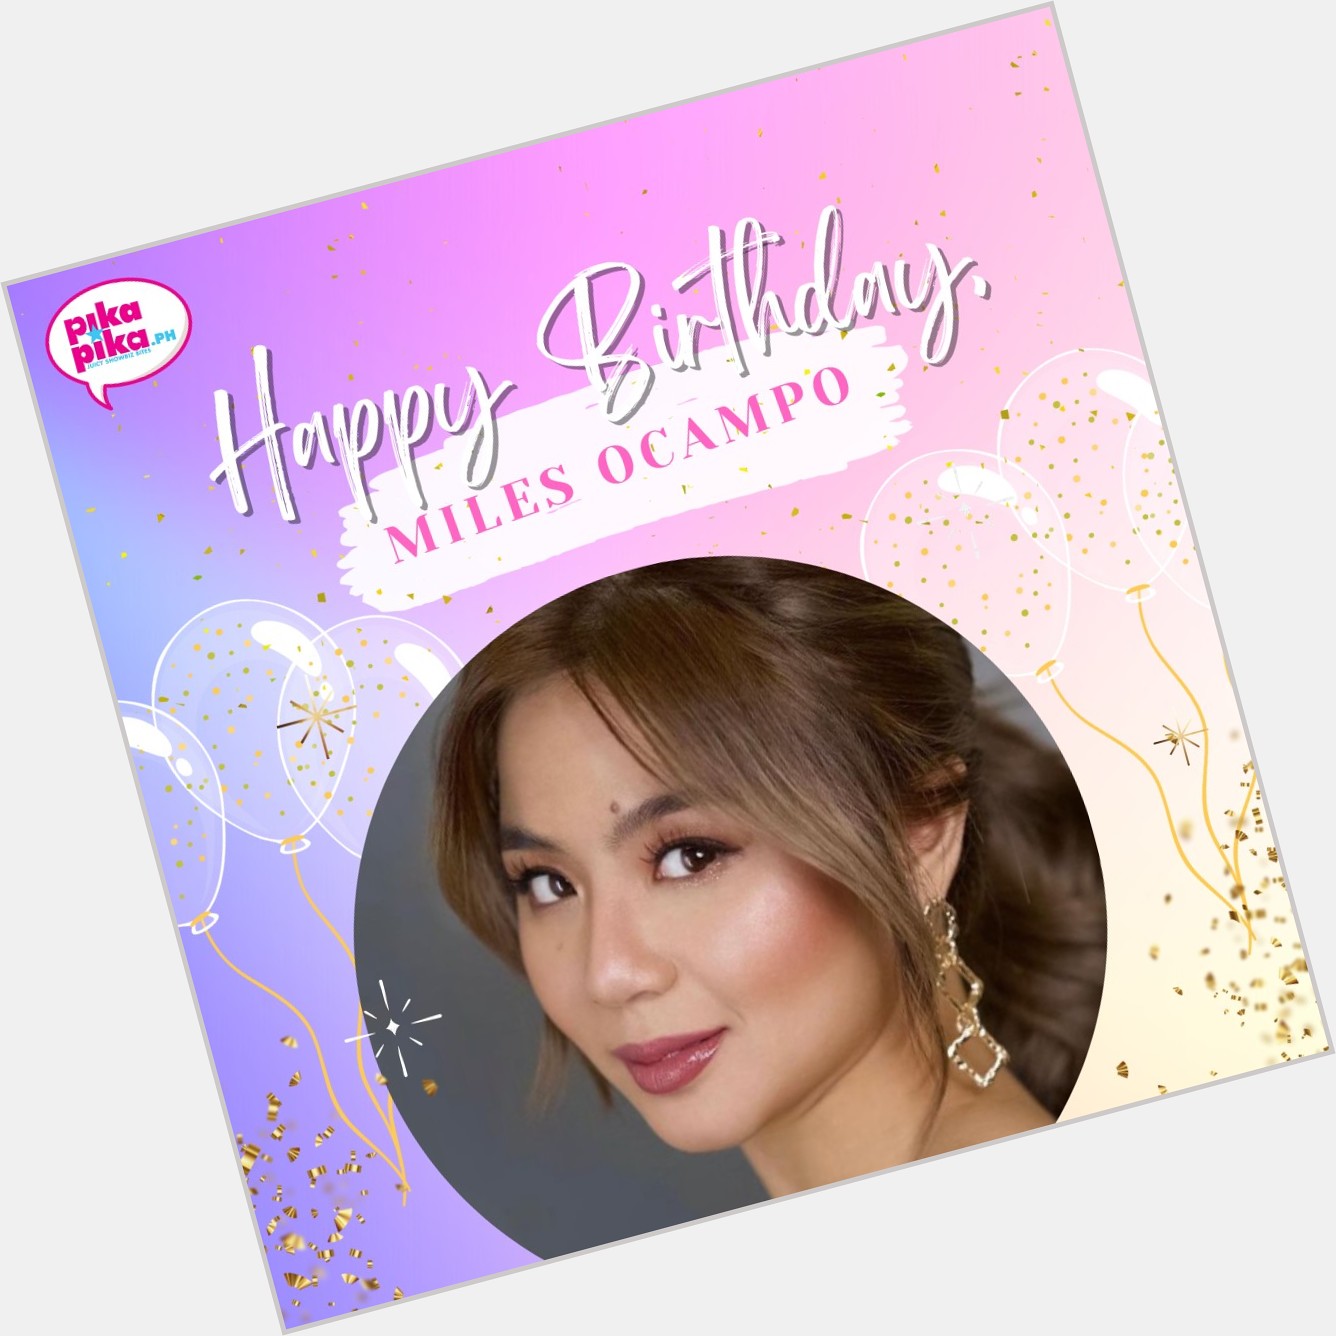 Happy birthday, Miles Ocampo! May your special day be filled with love and cheers.    